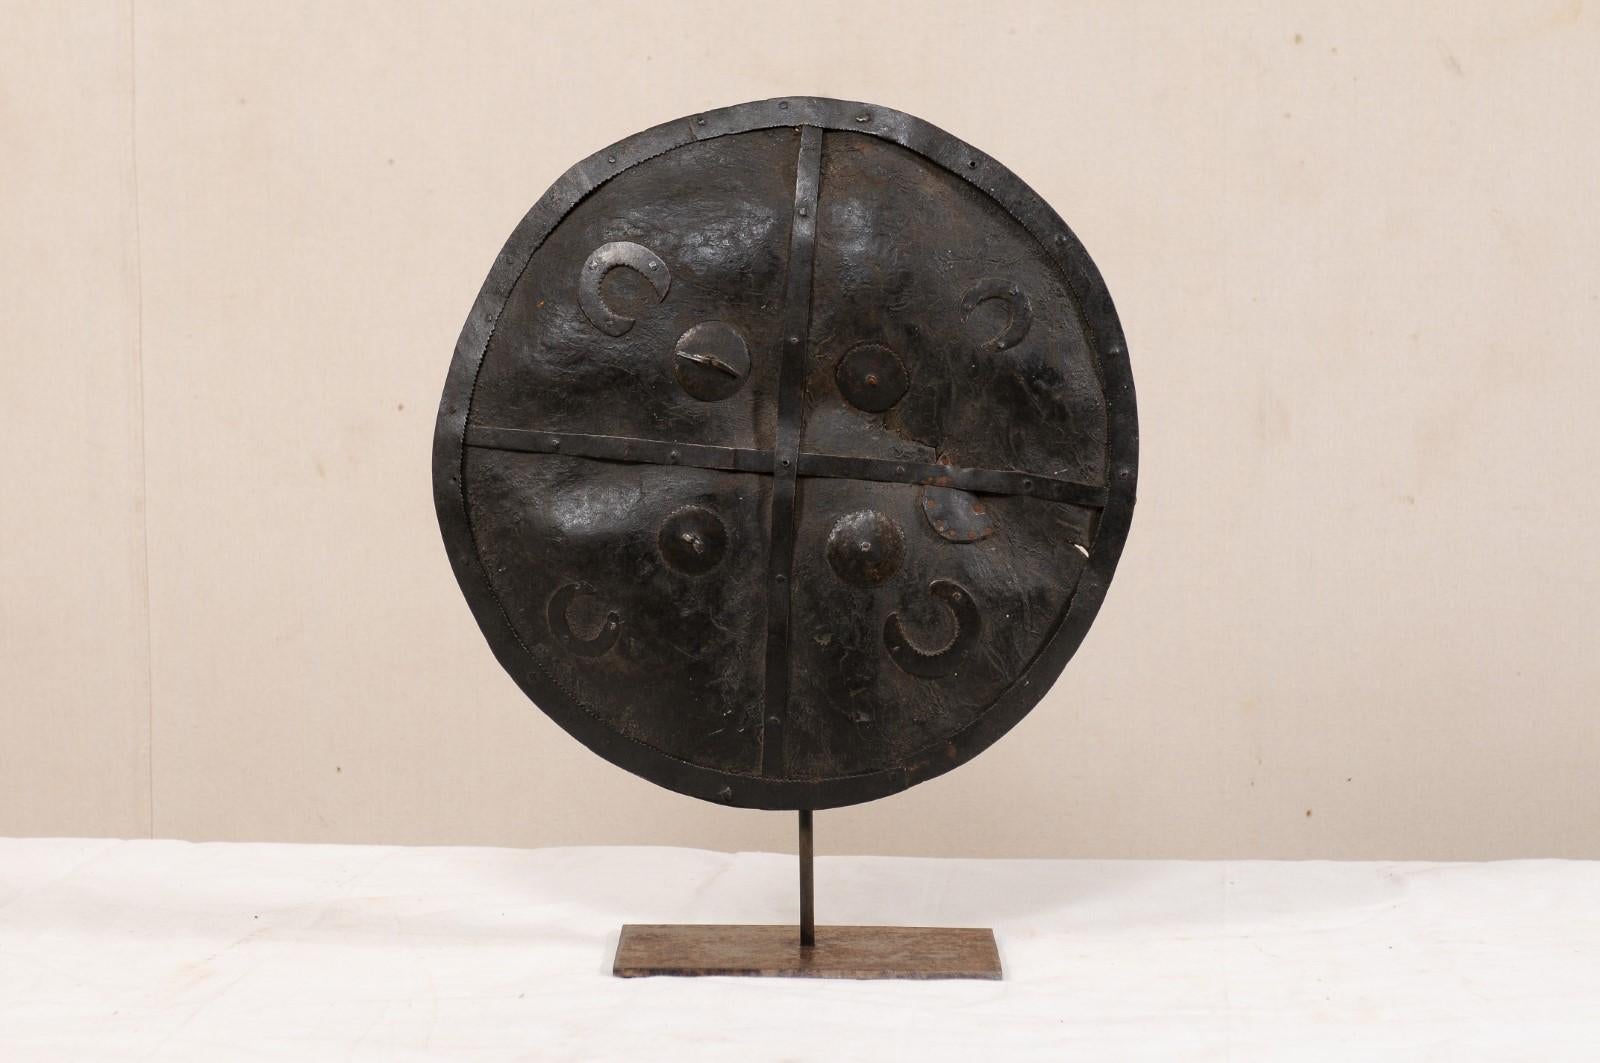 An Ethiopian tribal shield on custom iron stand. This vintage shield, originating from Ethiopia, has an overall convexly rounded-shape, and is made of a rich brown animal hide with wonderful patina. The leather shield is decorated with tooled metal